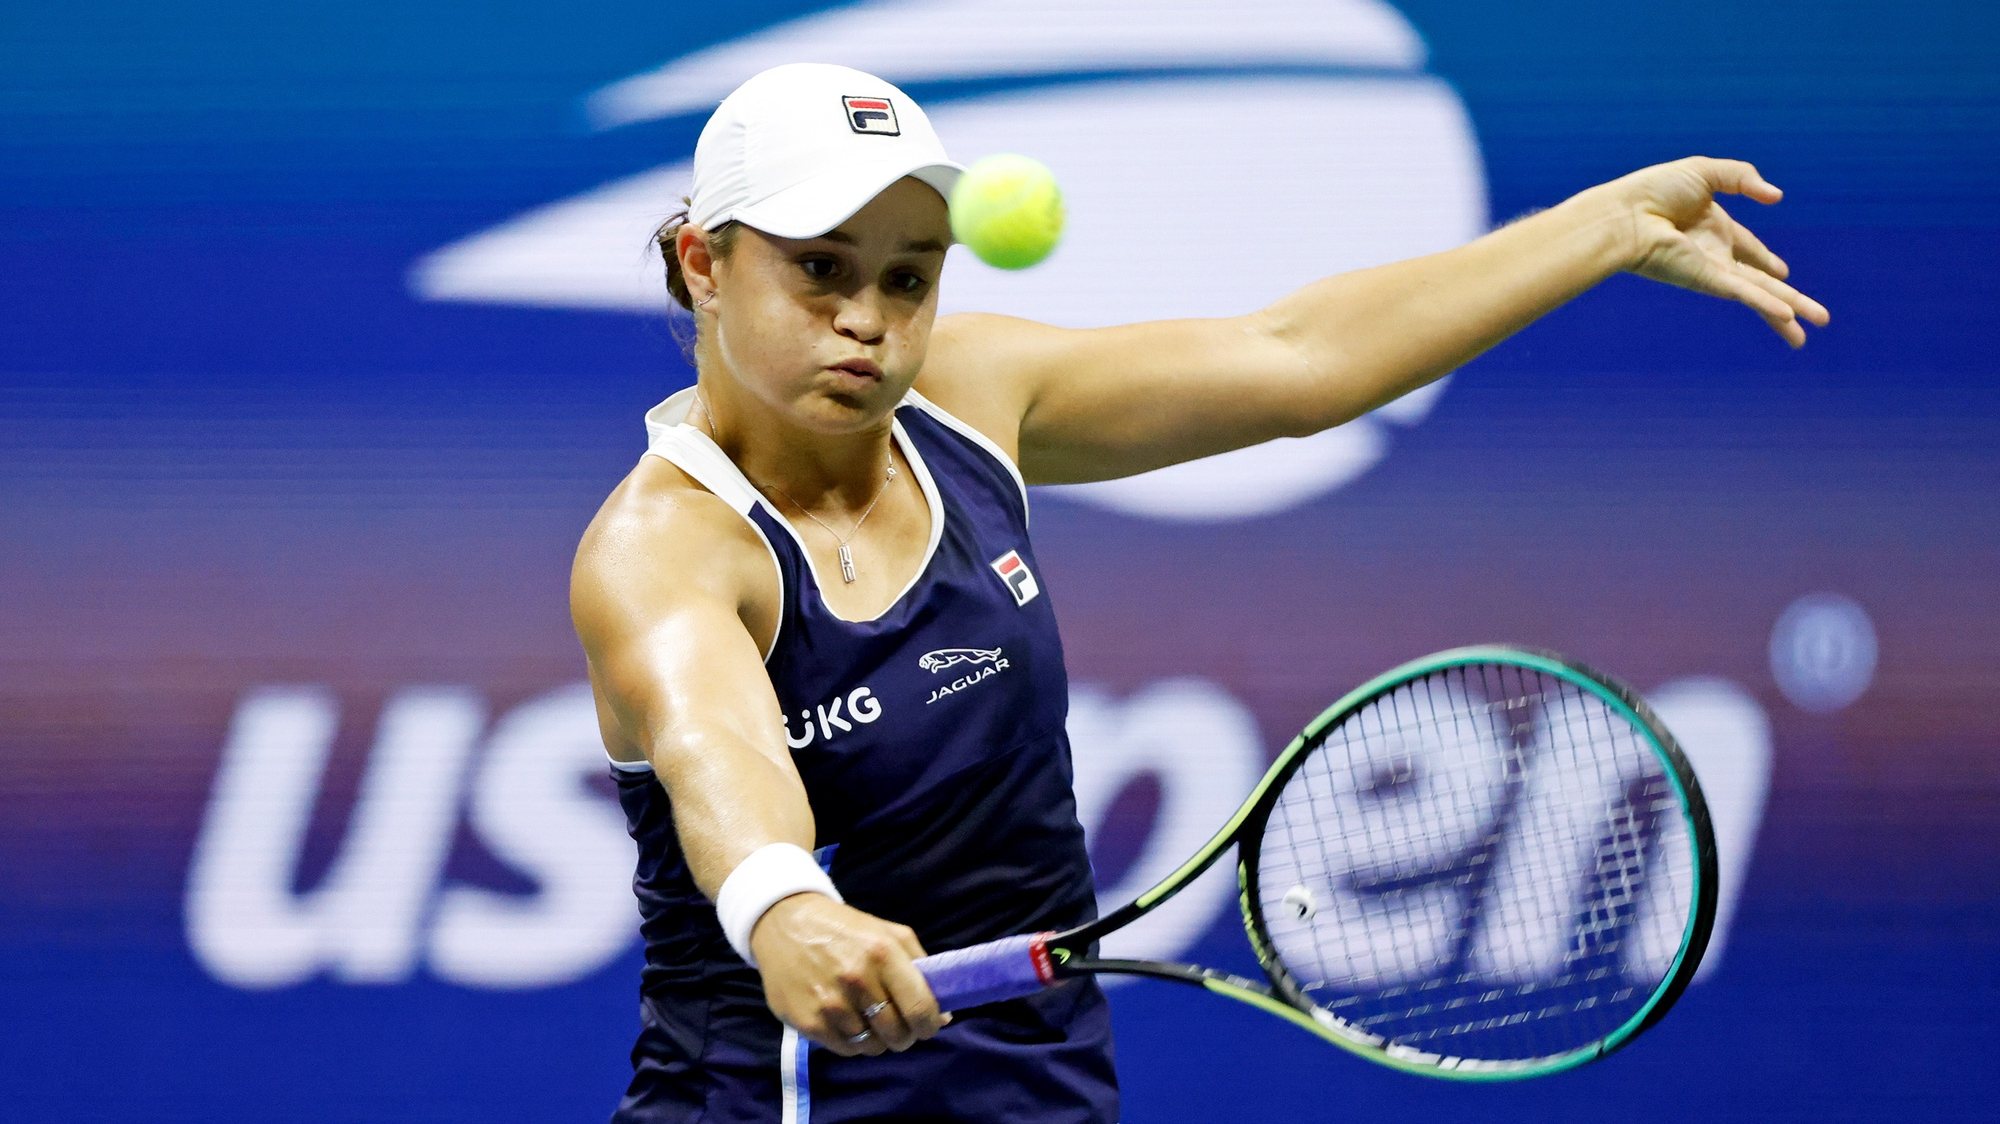 epa09448357 Ashleigh Barty of the Australia in action against Shelby Rogers of the USA during their match on the sixth day of the US Open Tennis Championships at the USTA National Tennis Center in Flushing Meadows, New York, USA, 04 September 2021. The US Open runs from 30 August through 12 September.  EPA/JASON SZENES